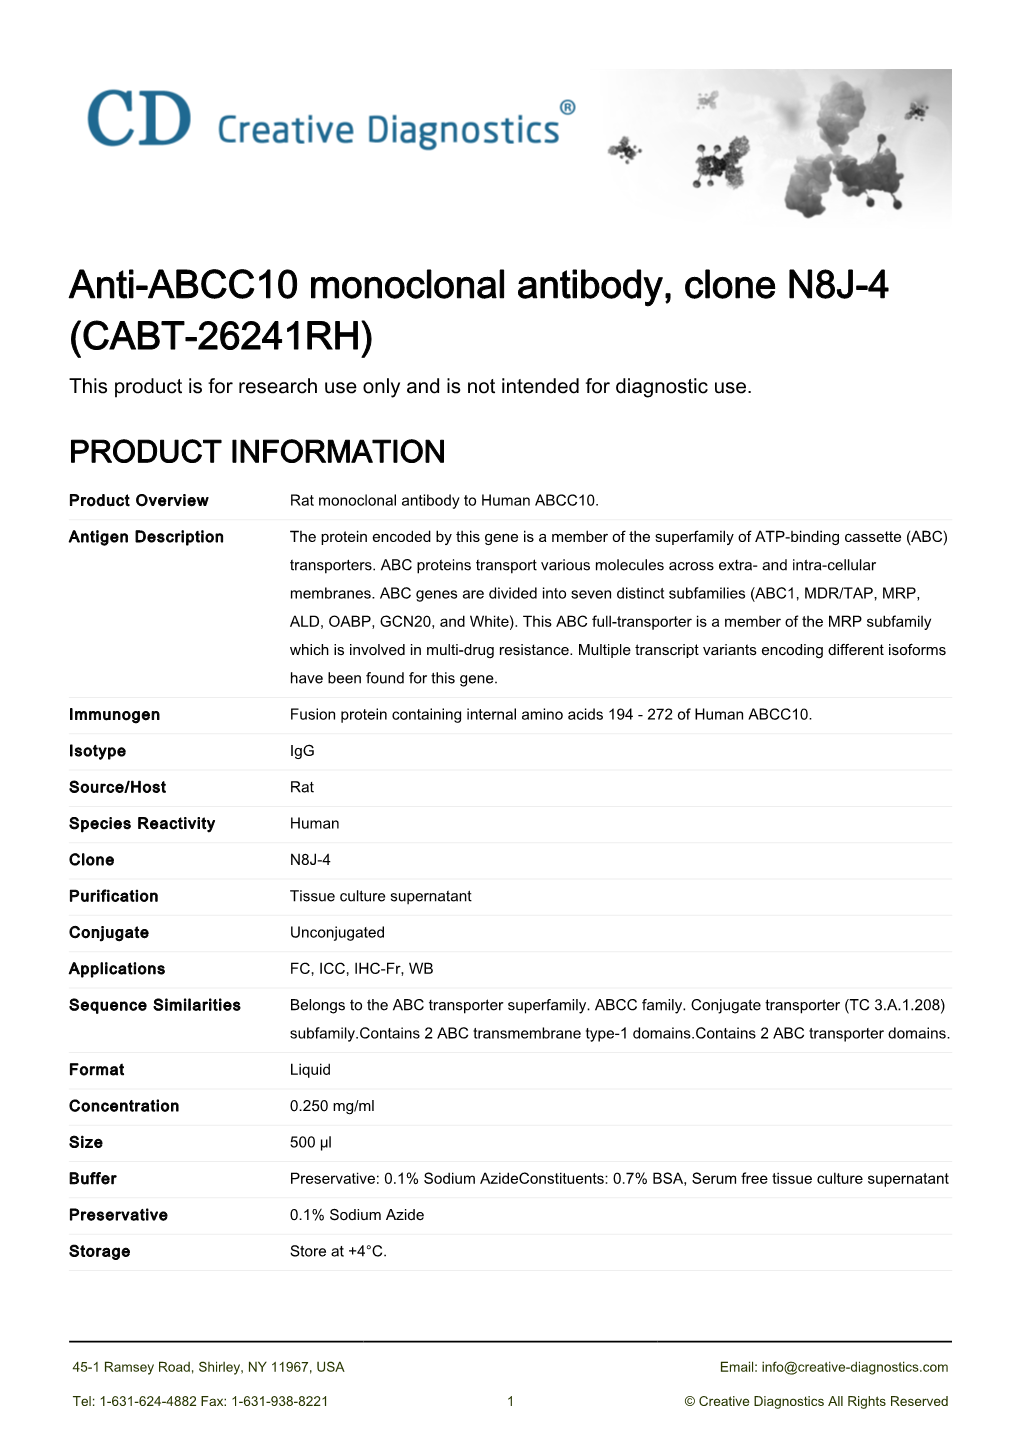 Anti-ABCC10 Monoclonal Antibody, Clone N8J-4 (CABT-26241RH) This Product Is for Research Use Only and Is Not Intended for Diagnostic Use